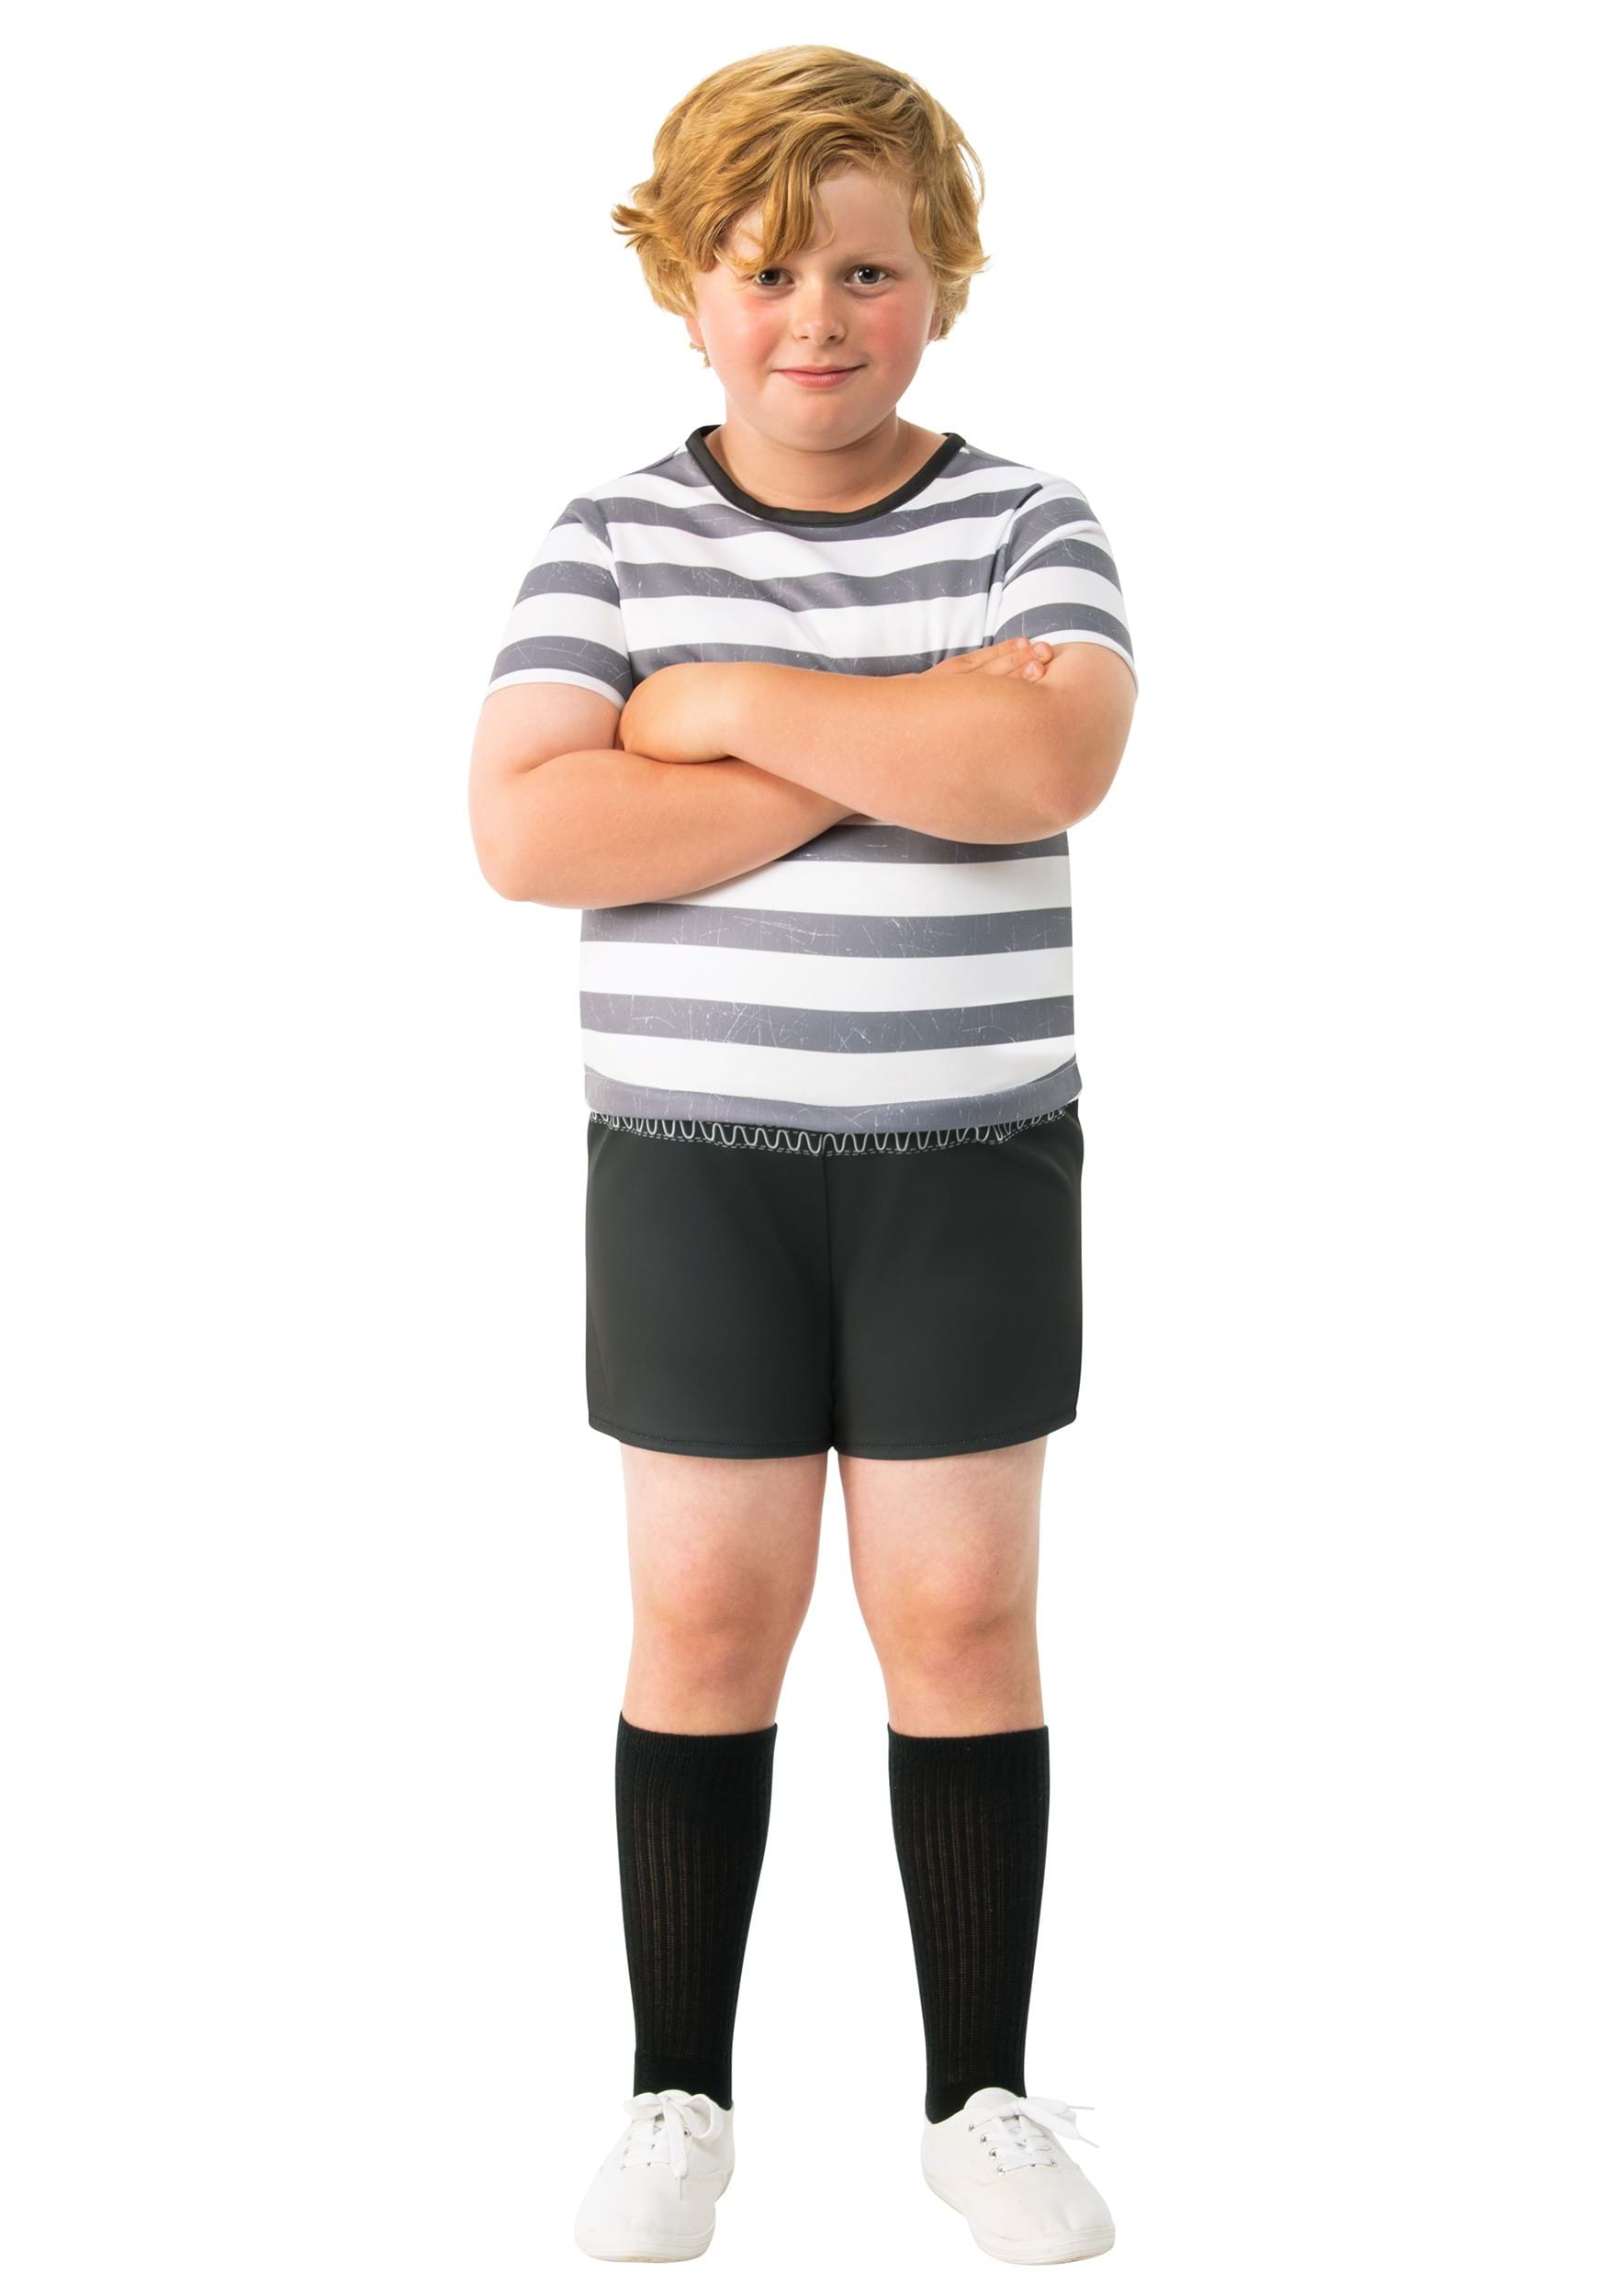 The Addams Family Pugsley Kid’s Costume